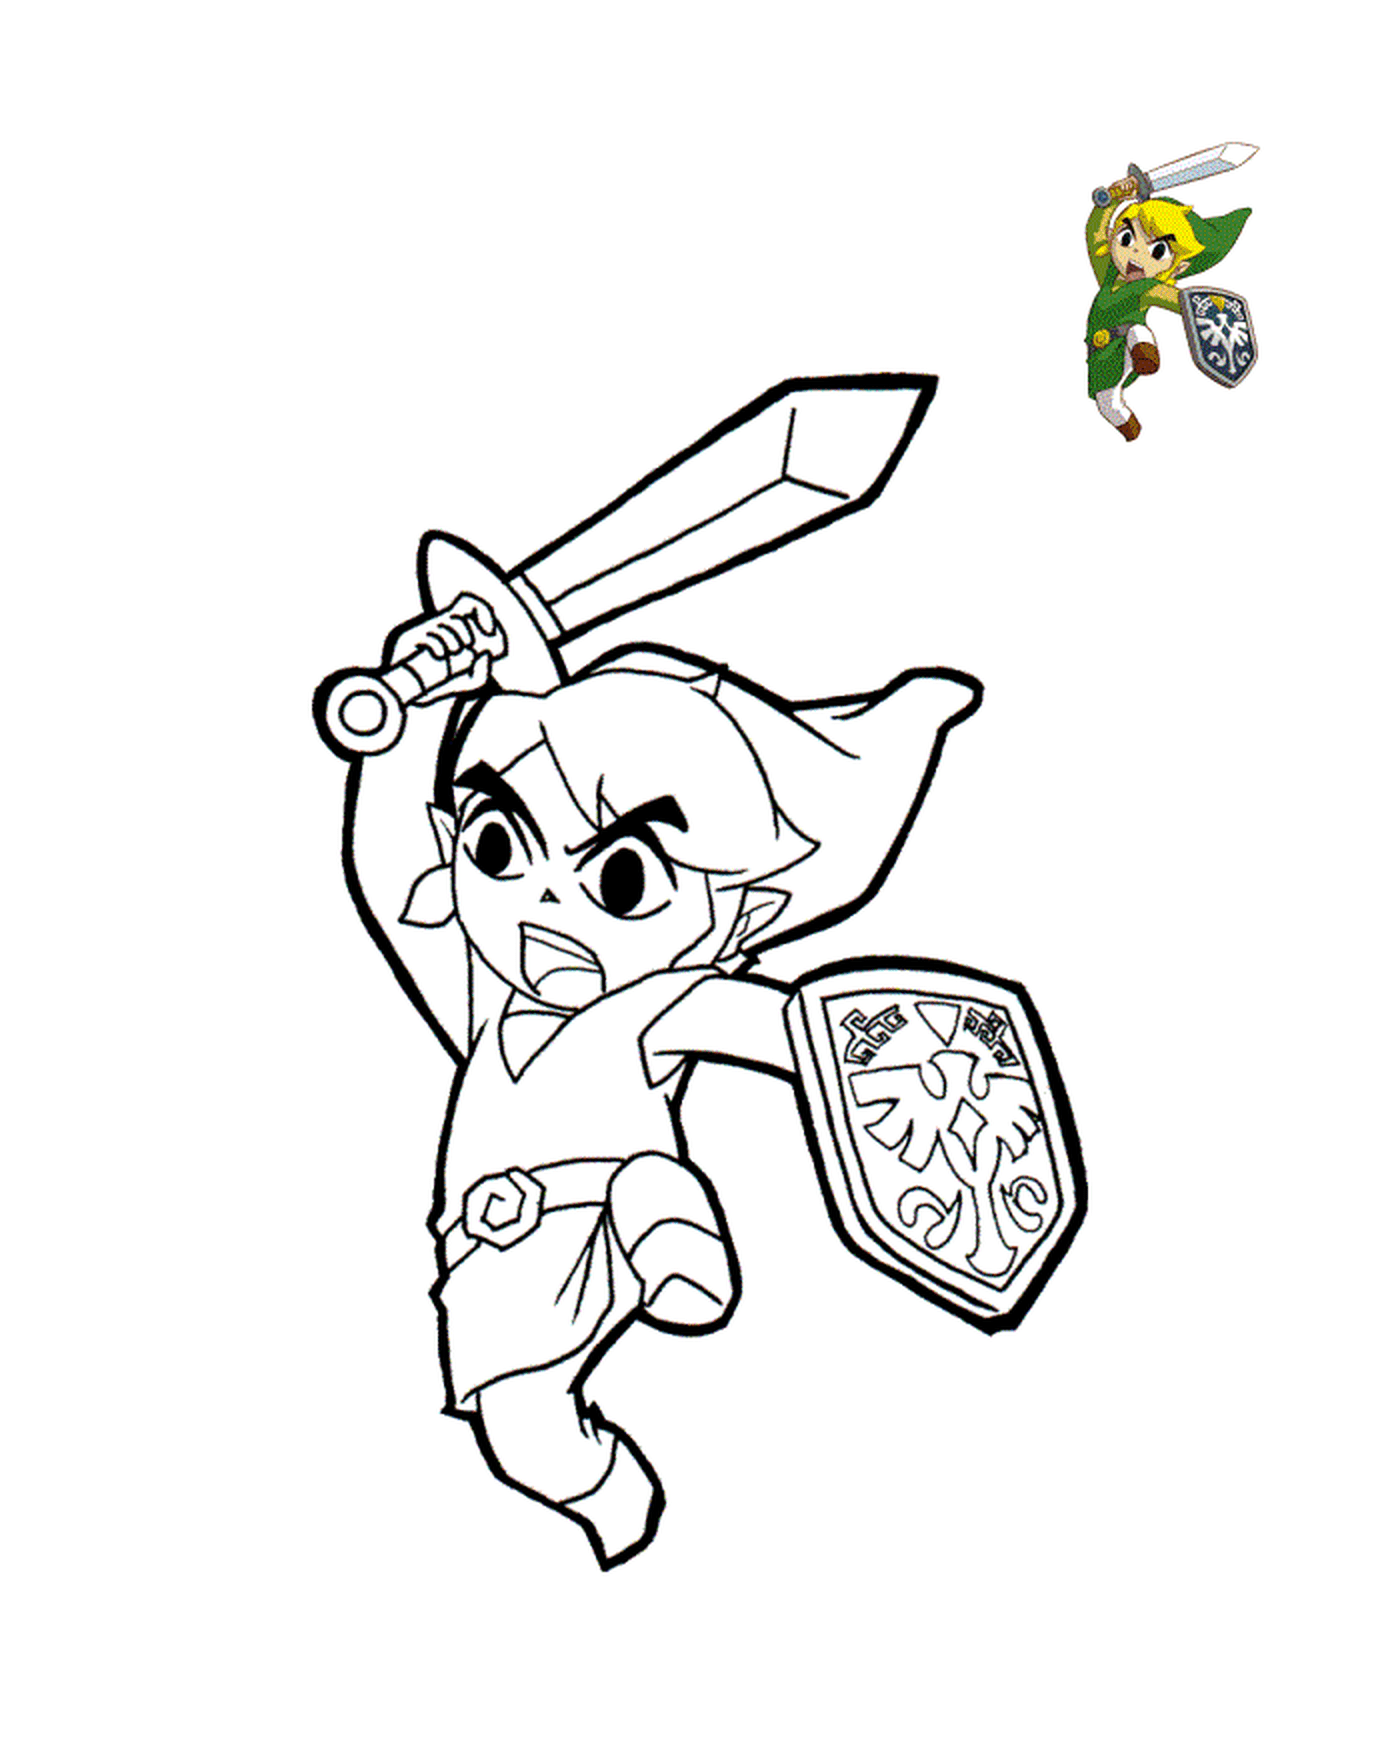  Character holding sword and shield 